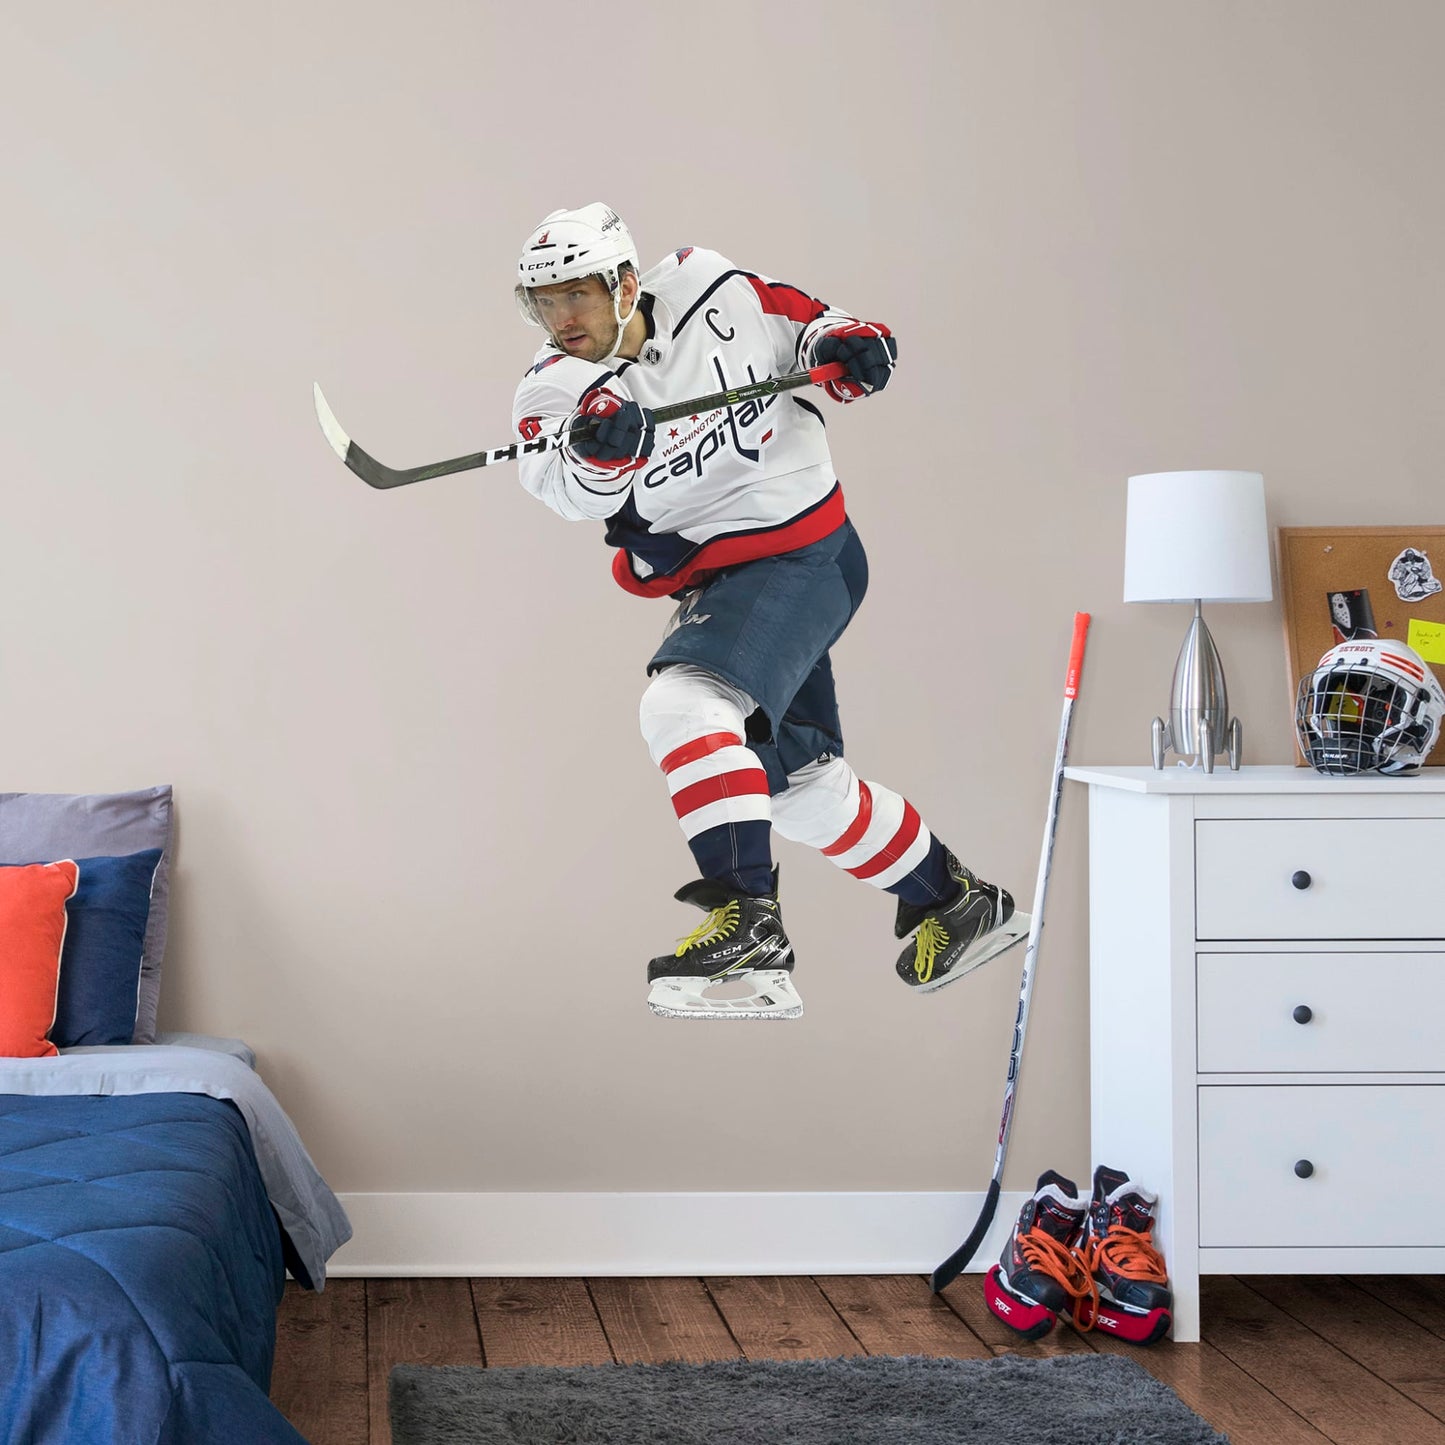 Large Athlete + 2 Decals (15"W x 16"H) History in in the making! One look at his vicious one-timer, and you know Alex Ovechkin is a living legend on ice. Well on his way to being the greatest goal scorer in the NHL, Ovi is giving Gretzky a run for his money. Cheer on the Capitals and your favorite left winger with a high-grade vinyl reusable decal of the Great Eight.